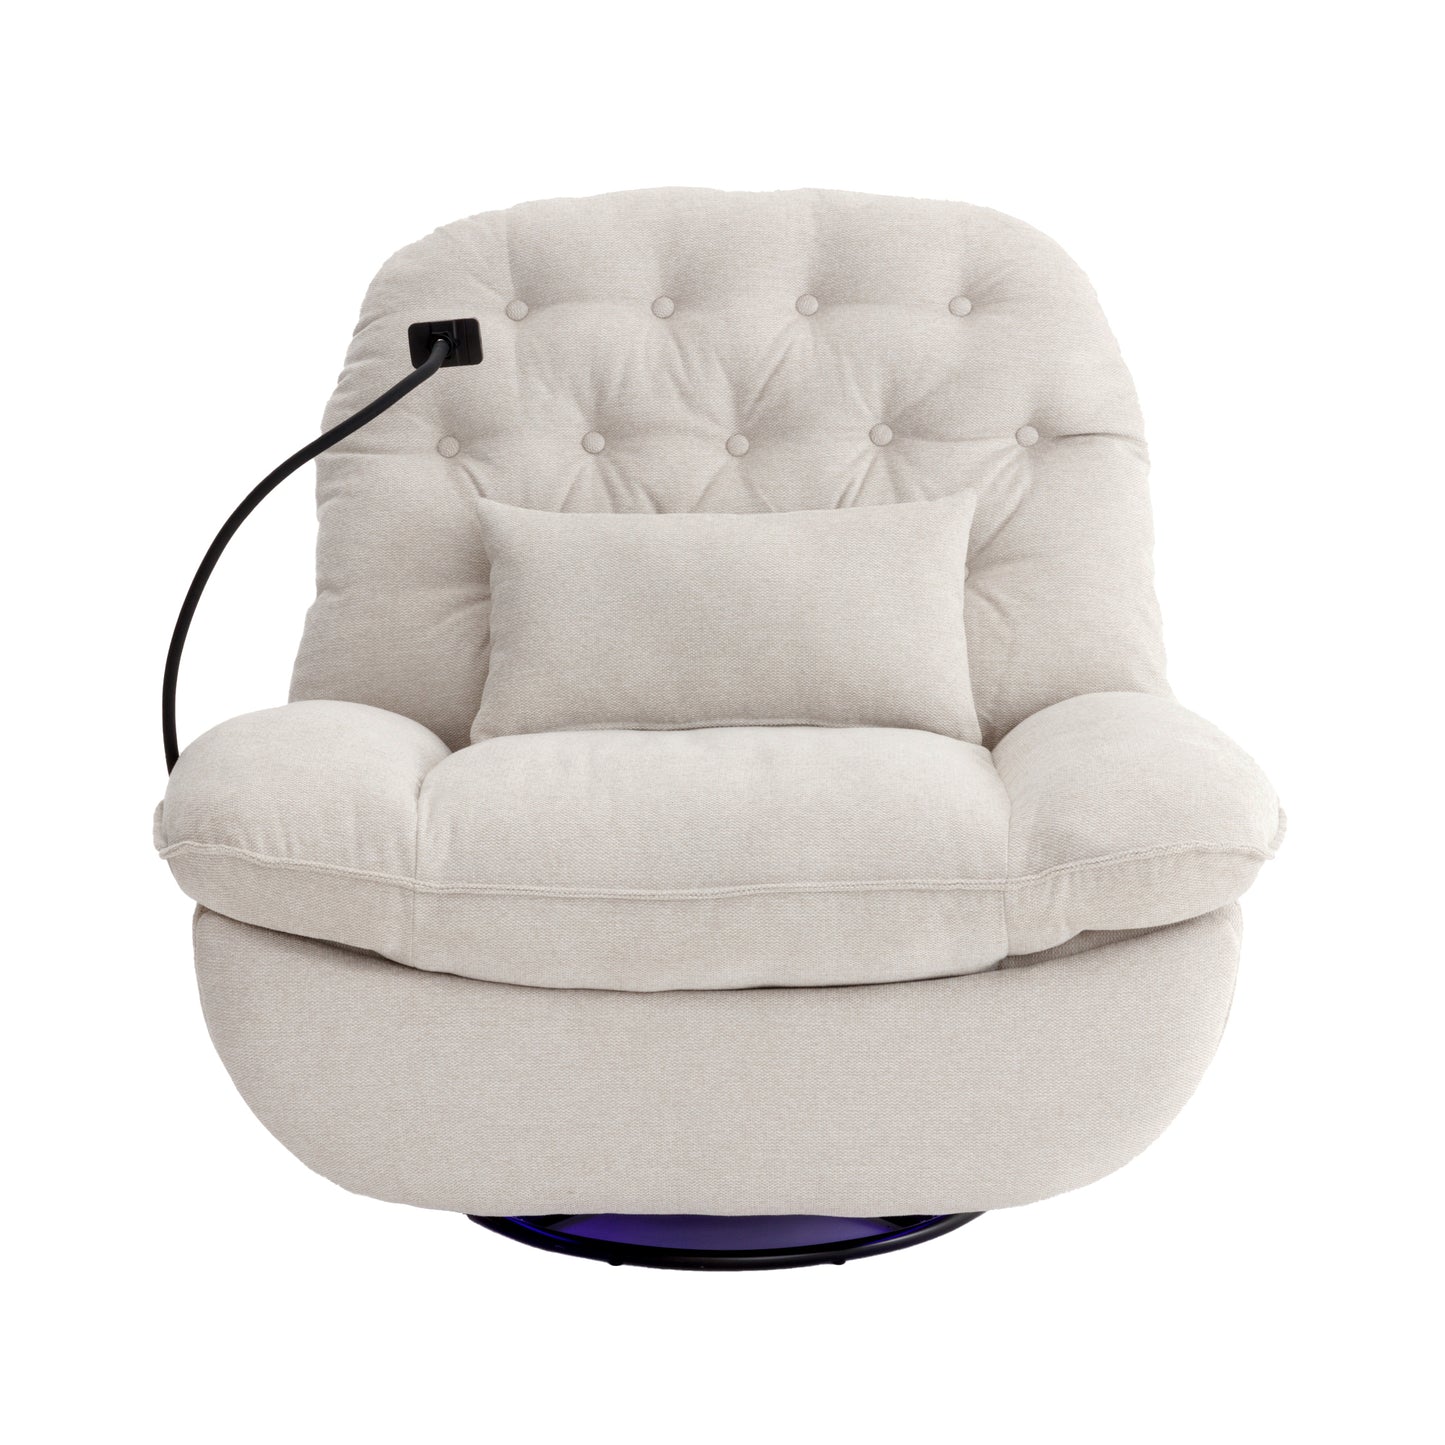 270 Degree Swivel Power Recliner with Voice Control, Bluetooth Music Player,USB Ports, Atmosphere Lamp, Hidden Arm Storage and Mobile Phone Holder for Living Room, Bedroom, Apartment, Beige